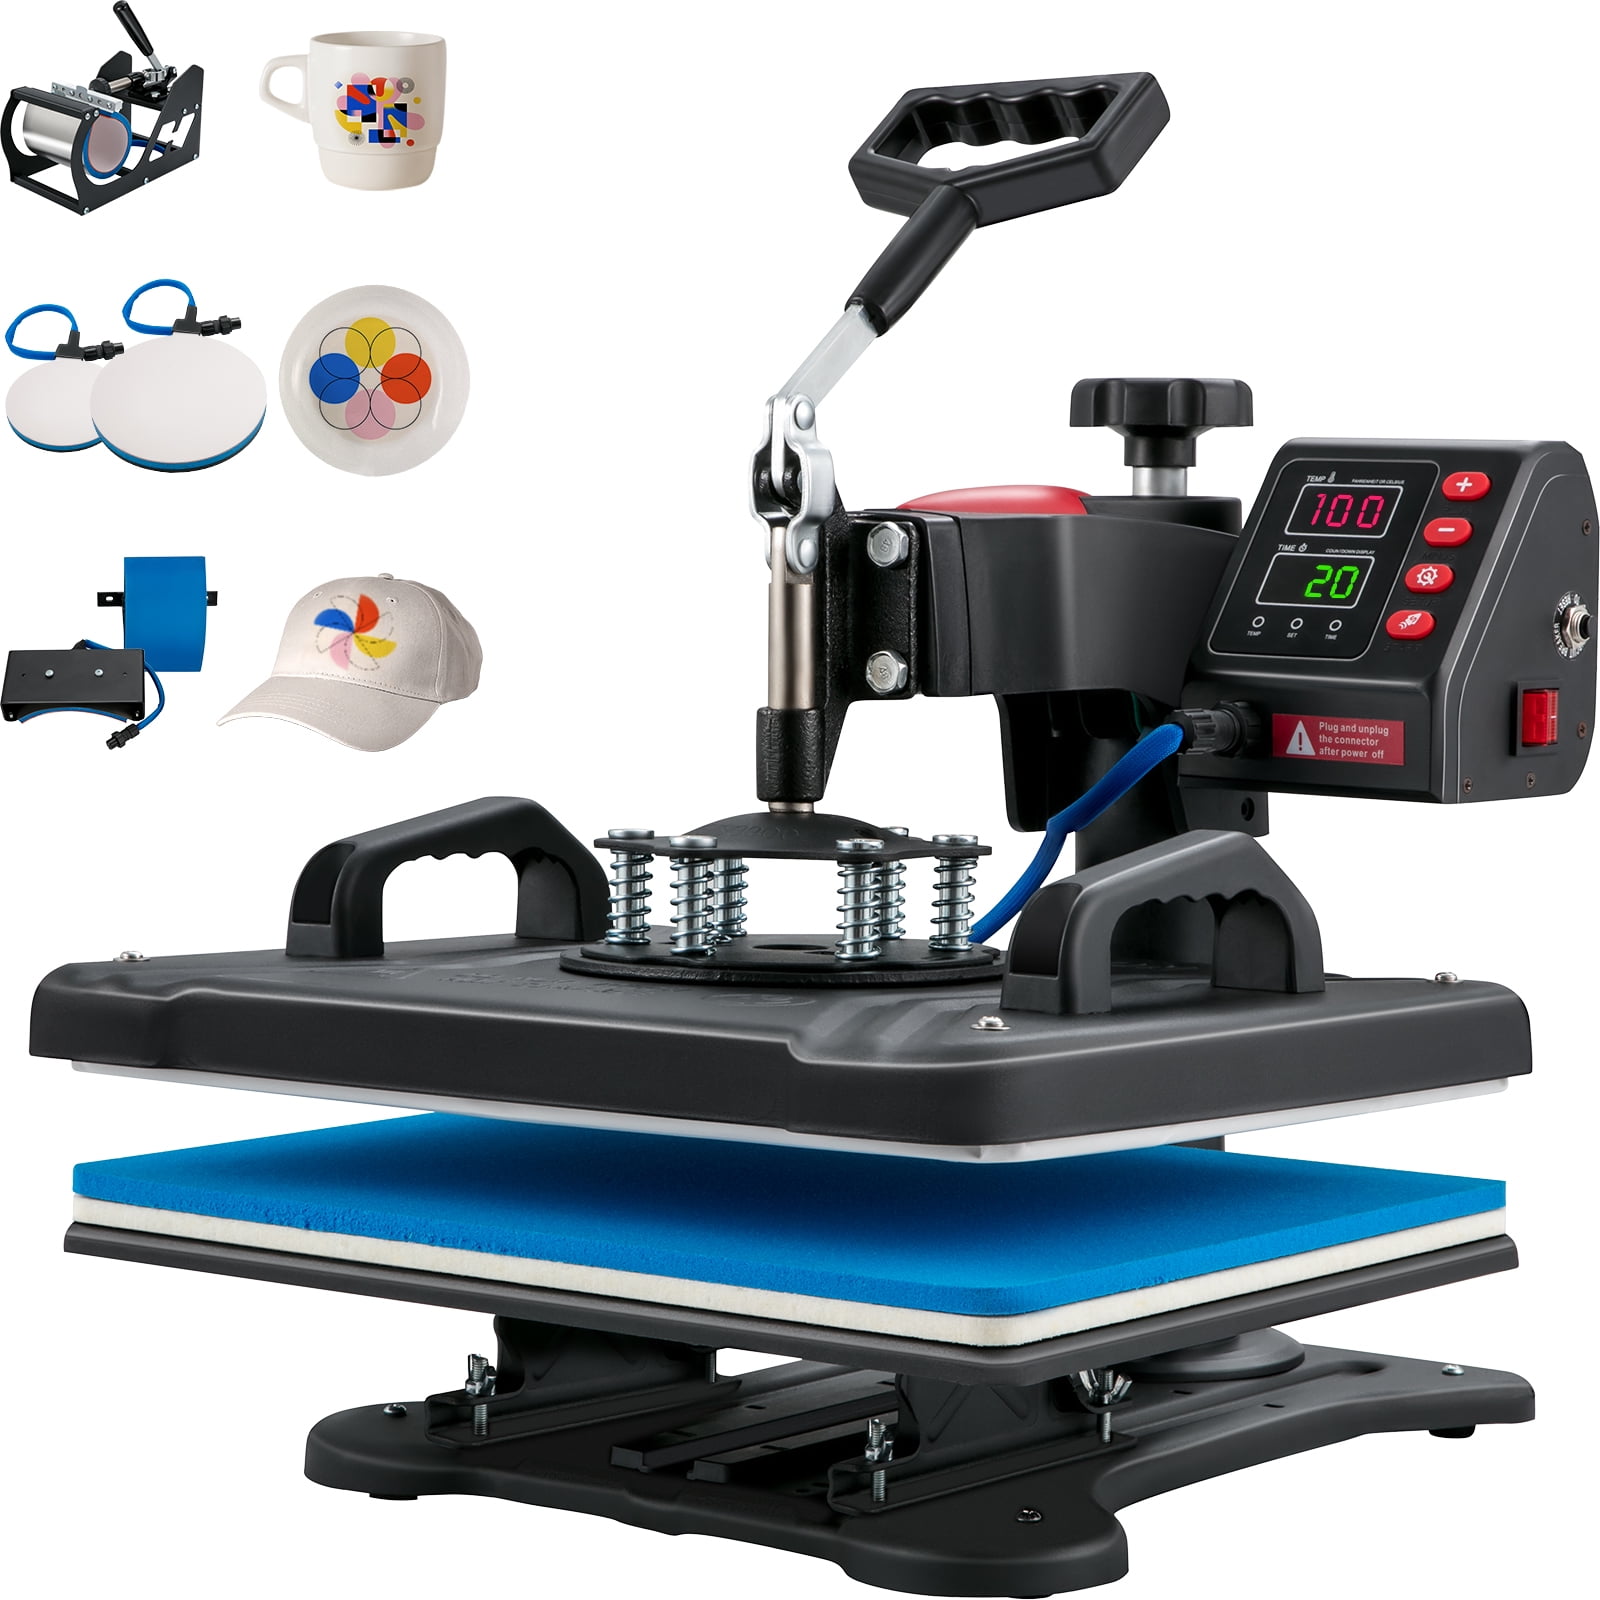 BENTISM Hat Heat Press, 4-in-1 Cap Heat Press Machine, Clamshell  Sublimation Transfer, LCD Digital Timer Temperature Control with 4pcs  Curved Heating Elements (6x3/6.7x2.7/6.7x2.7/8.1x3.5) 